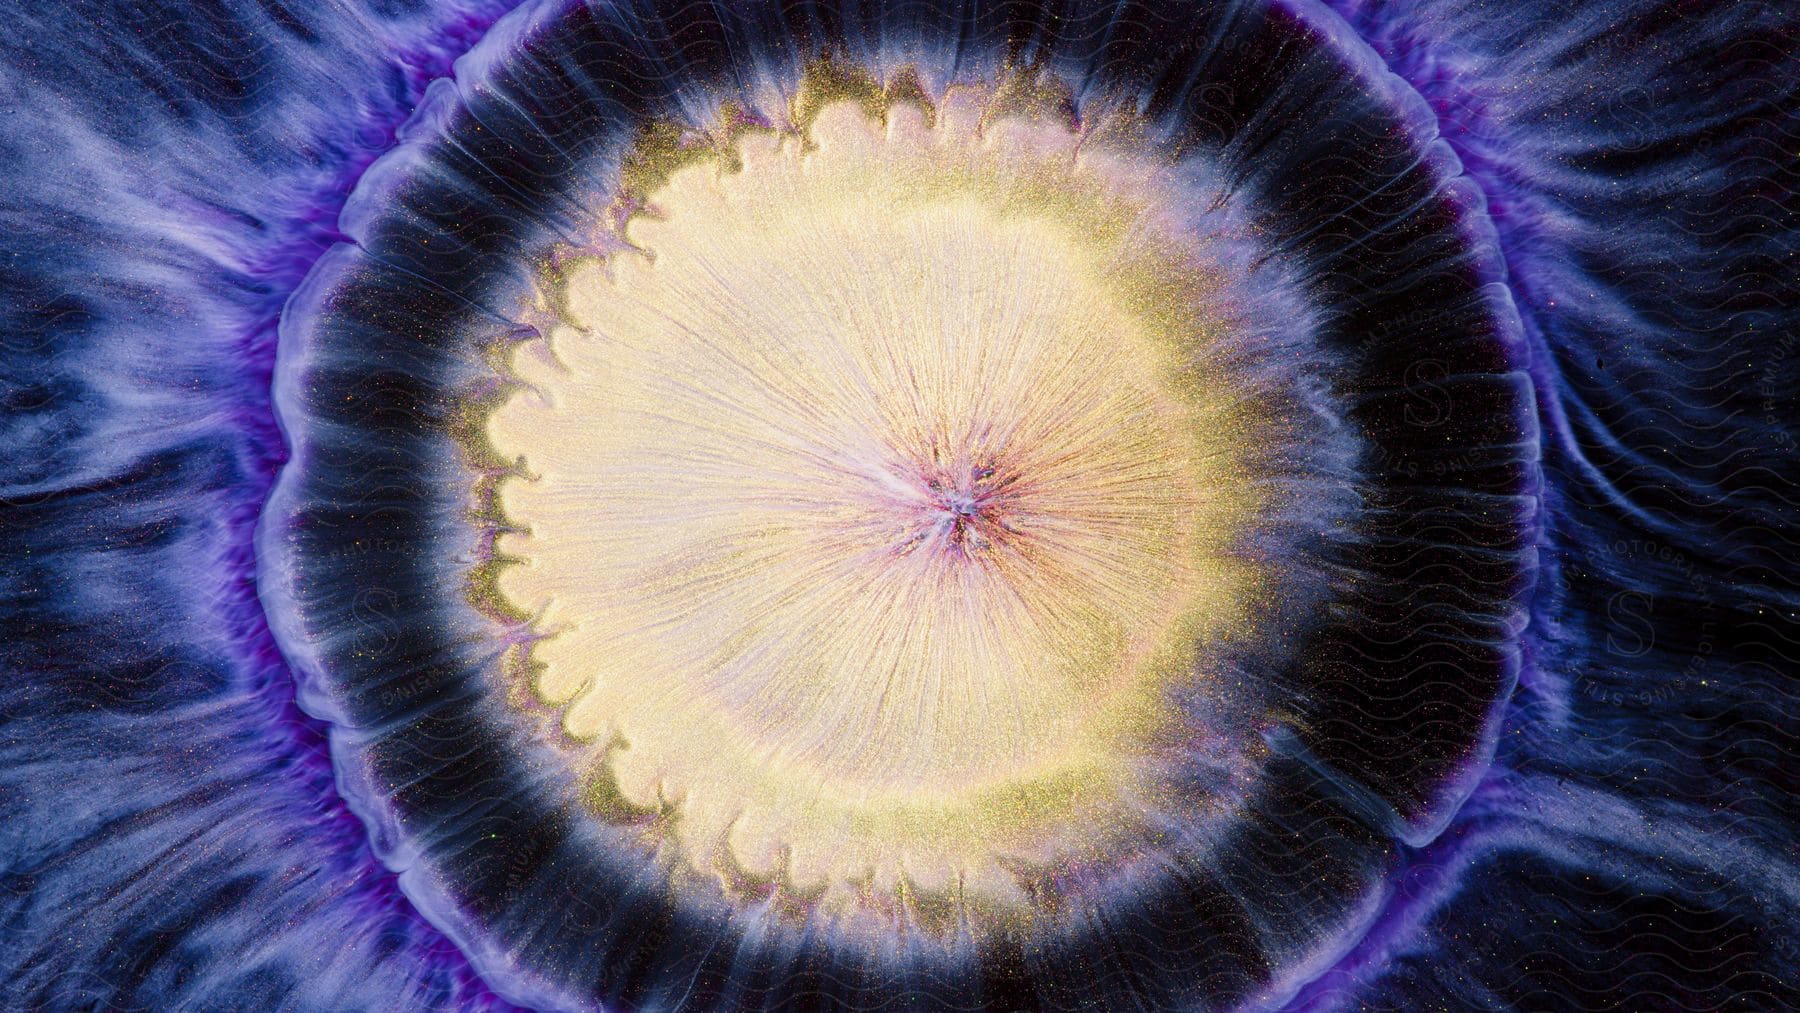 A close-up of the underside of a jellyfish, with a blue ring surrounding a yellow and white center, and blue and white streaks radiating out.